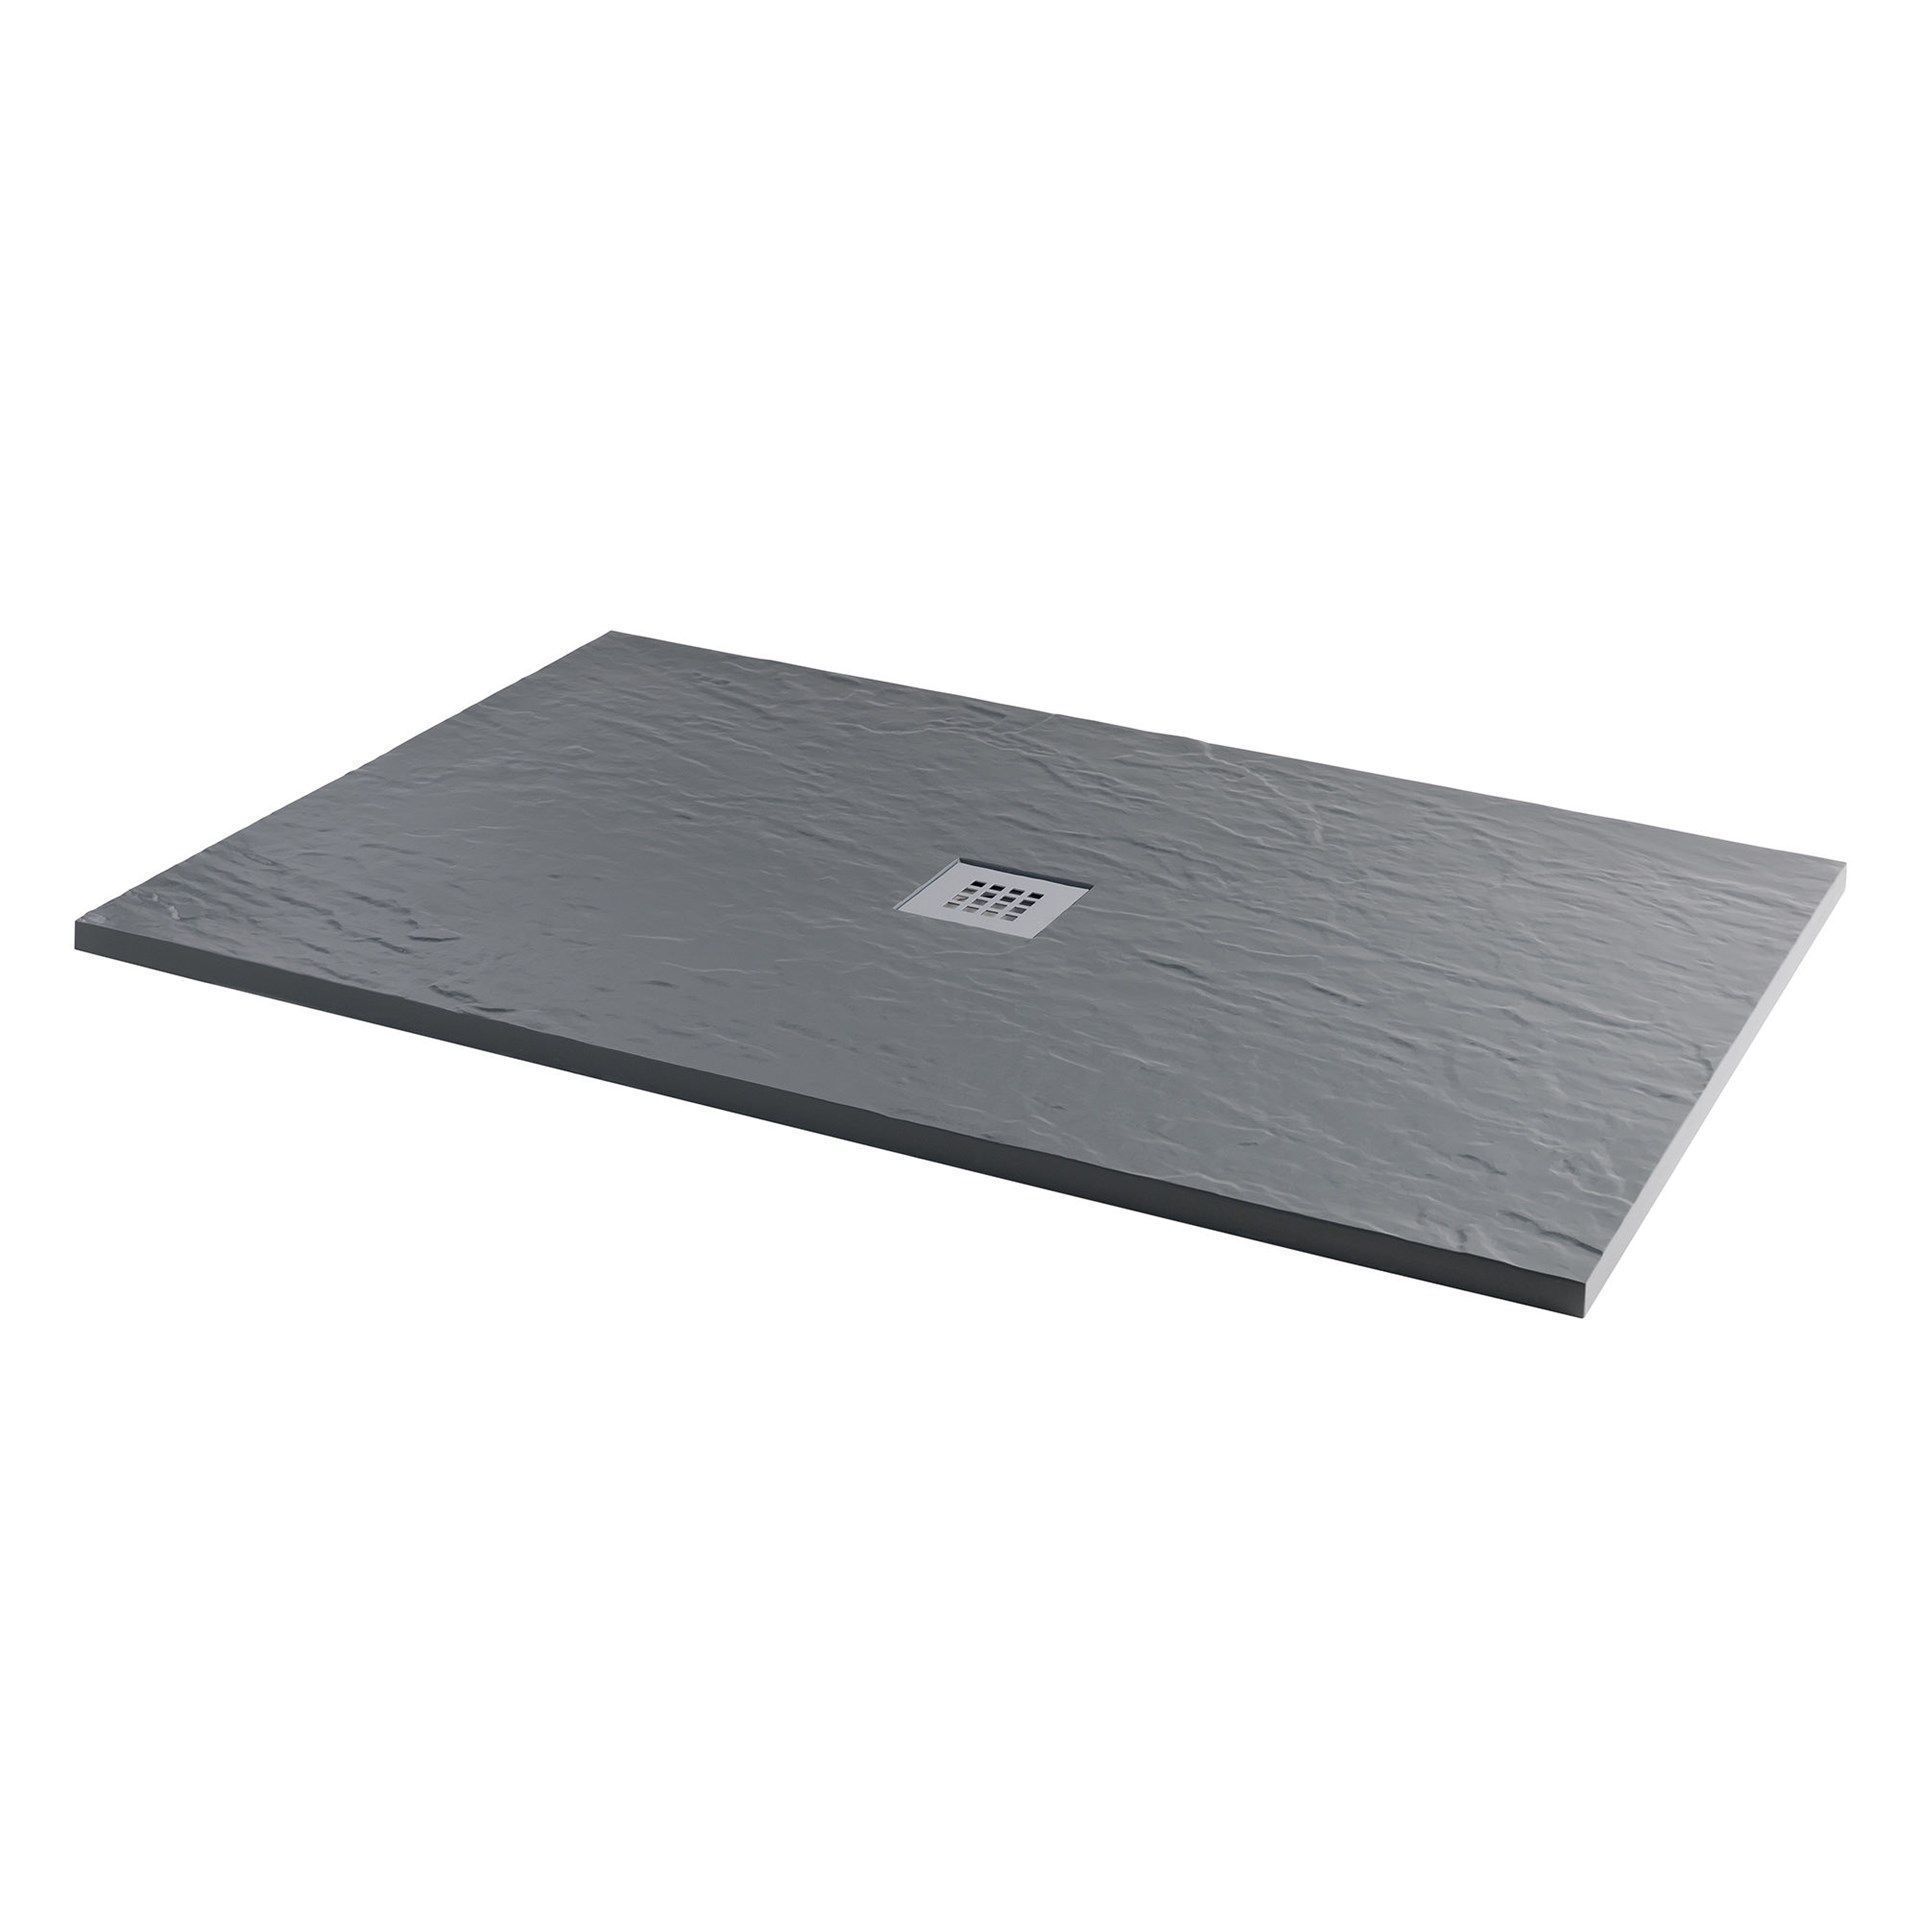 New 1000x800mm Rectangular Slate Effect Shower Tray In Grey. Manufactured In The Uk From High G... - Image 2 of 2